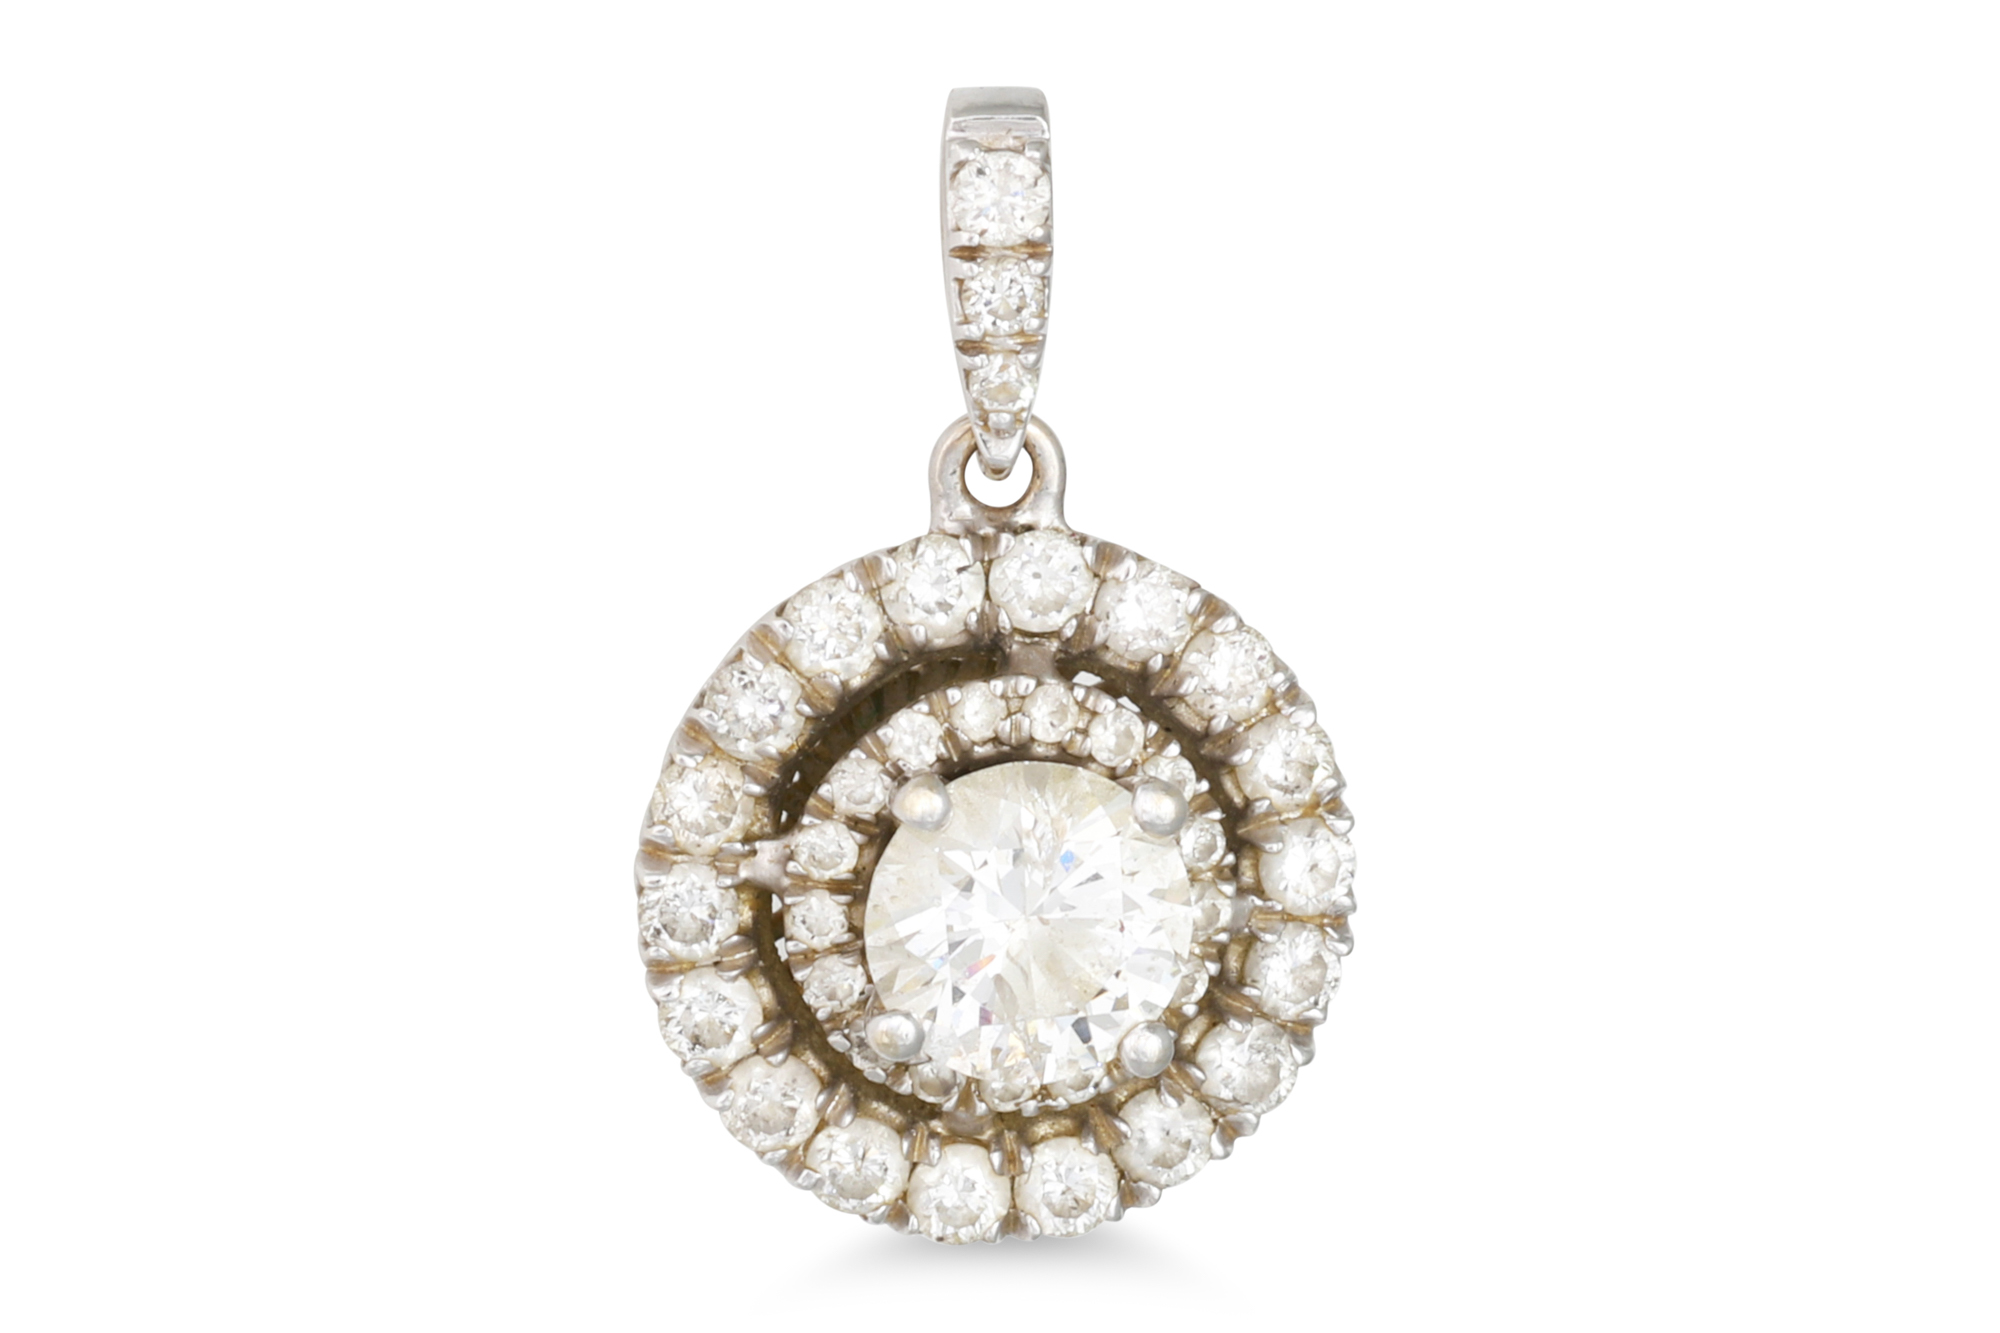 A DIAMOND SET HALO PENDANT, mounted in 14ct white gold. Estimated: weight of diamonds: 0.80 ct.